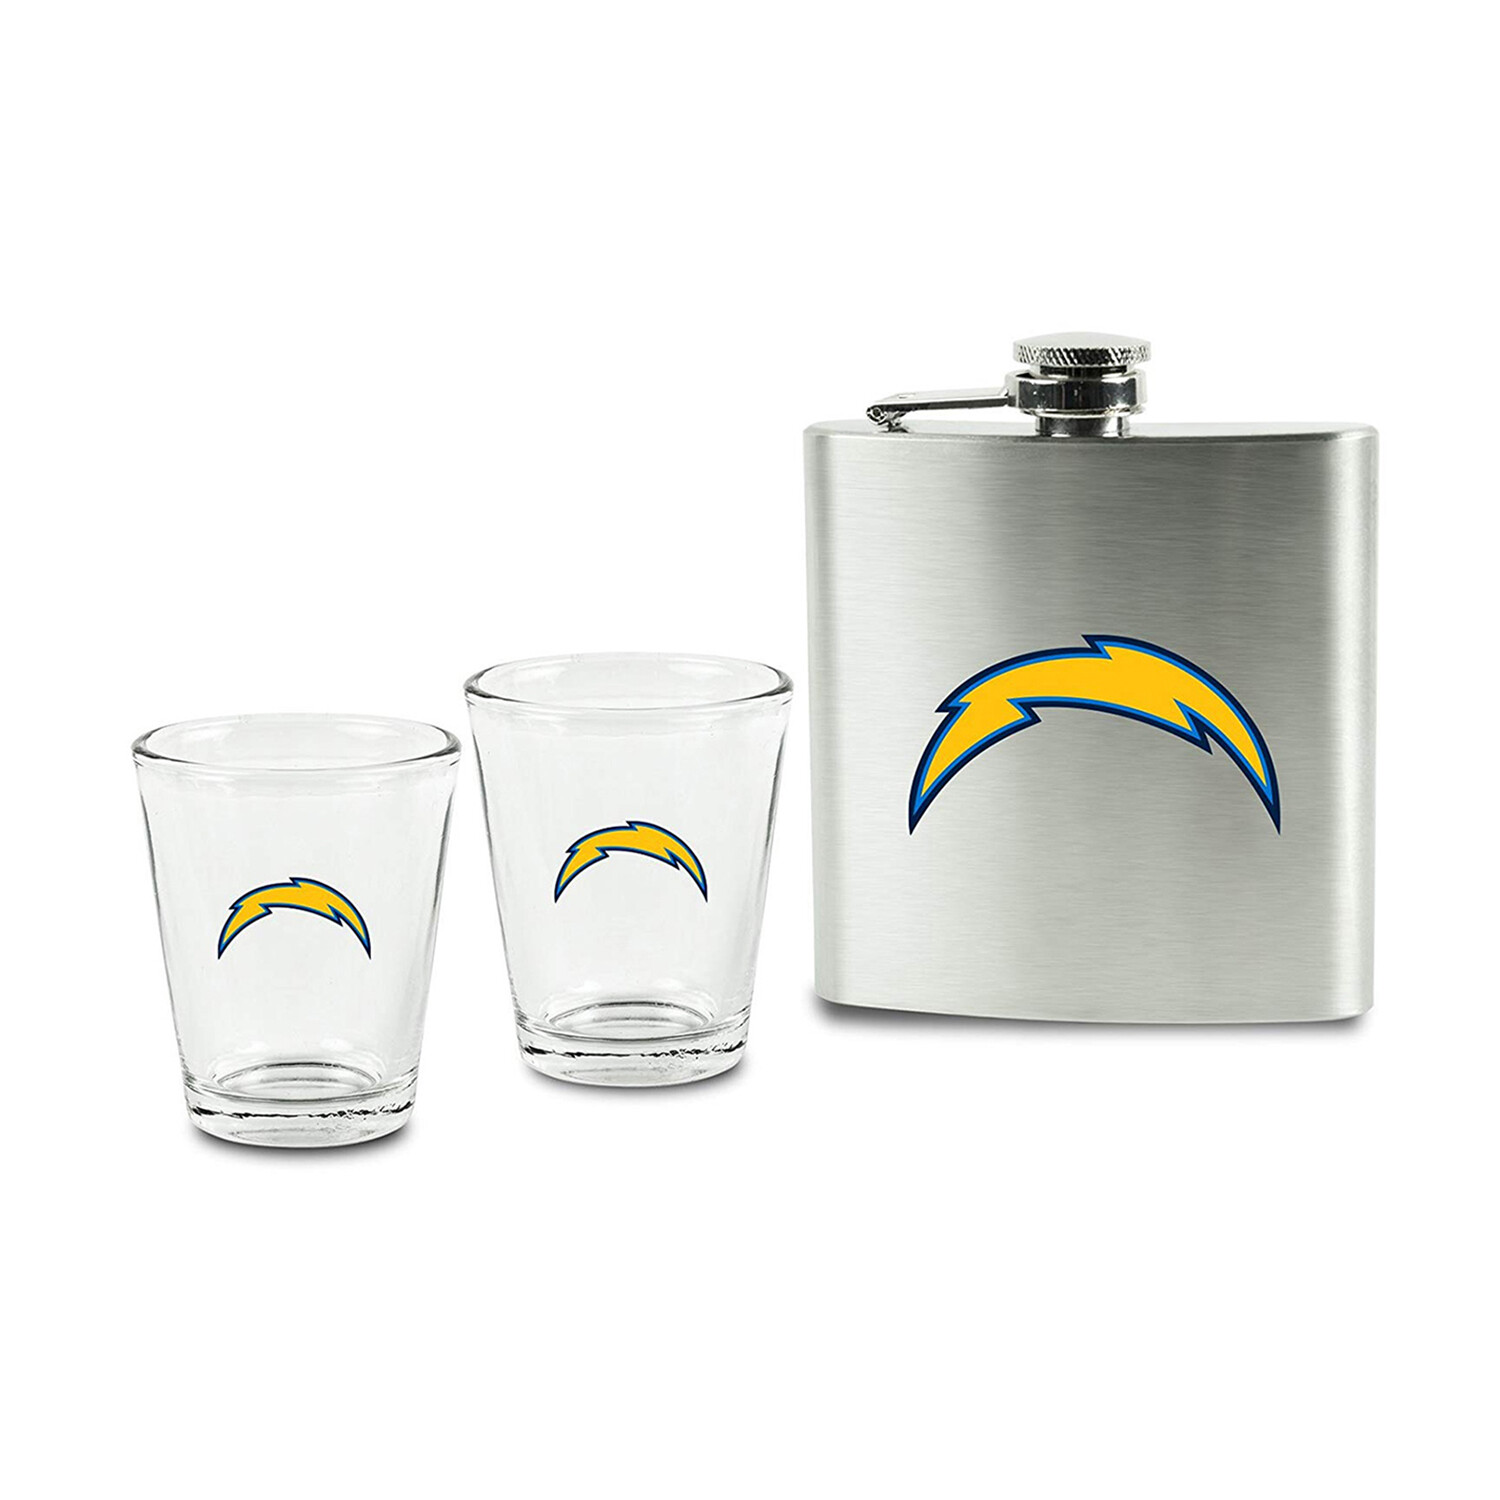 Los Angeles Chargers  Officially Licensed Los Angeles Chargers